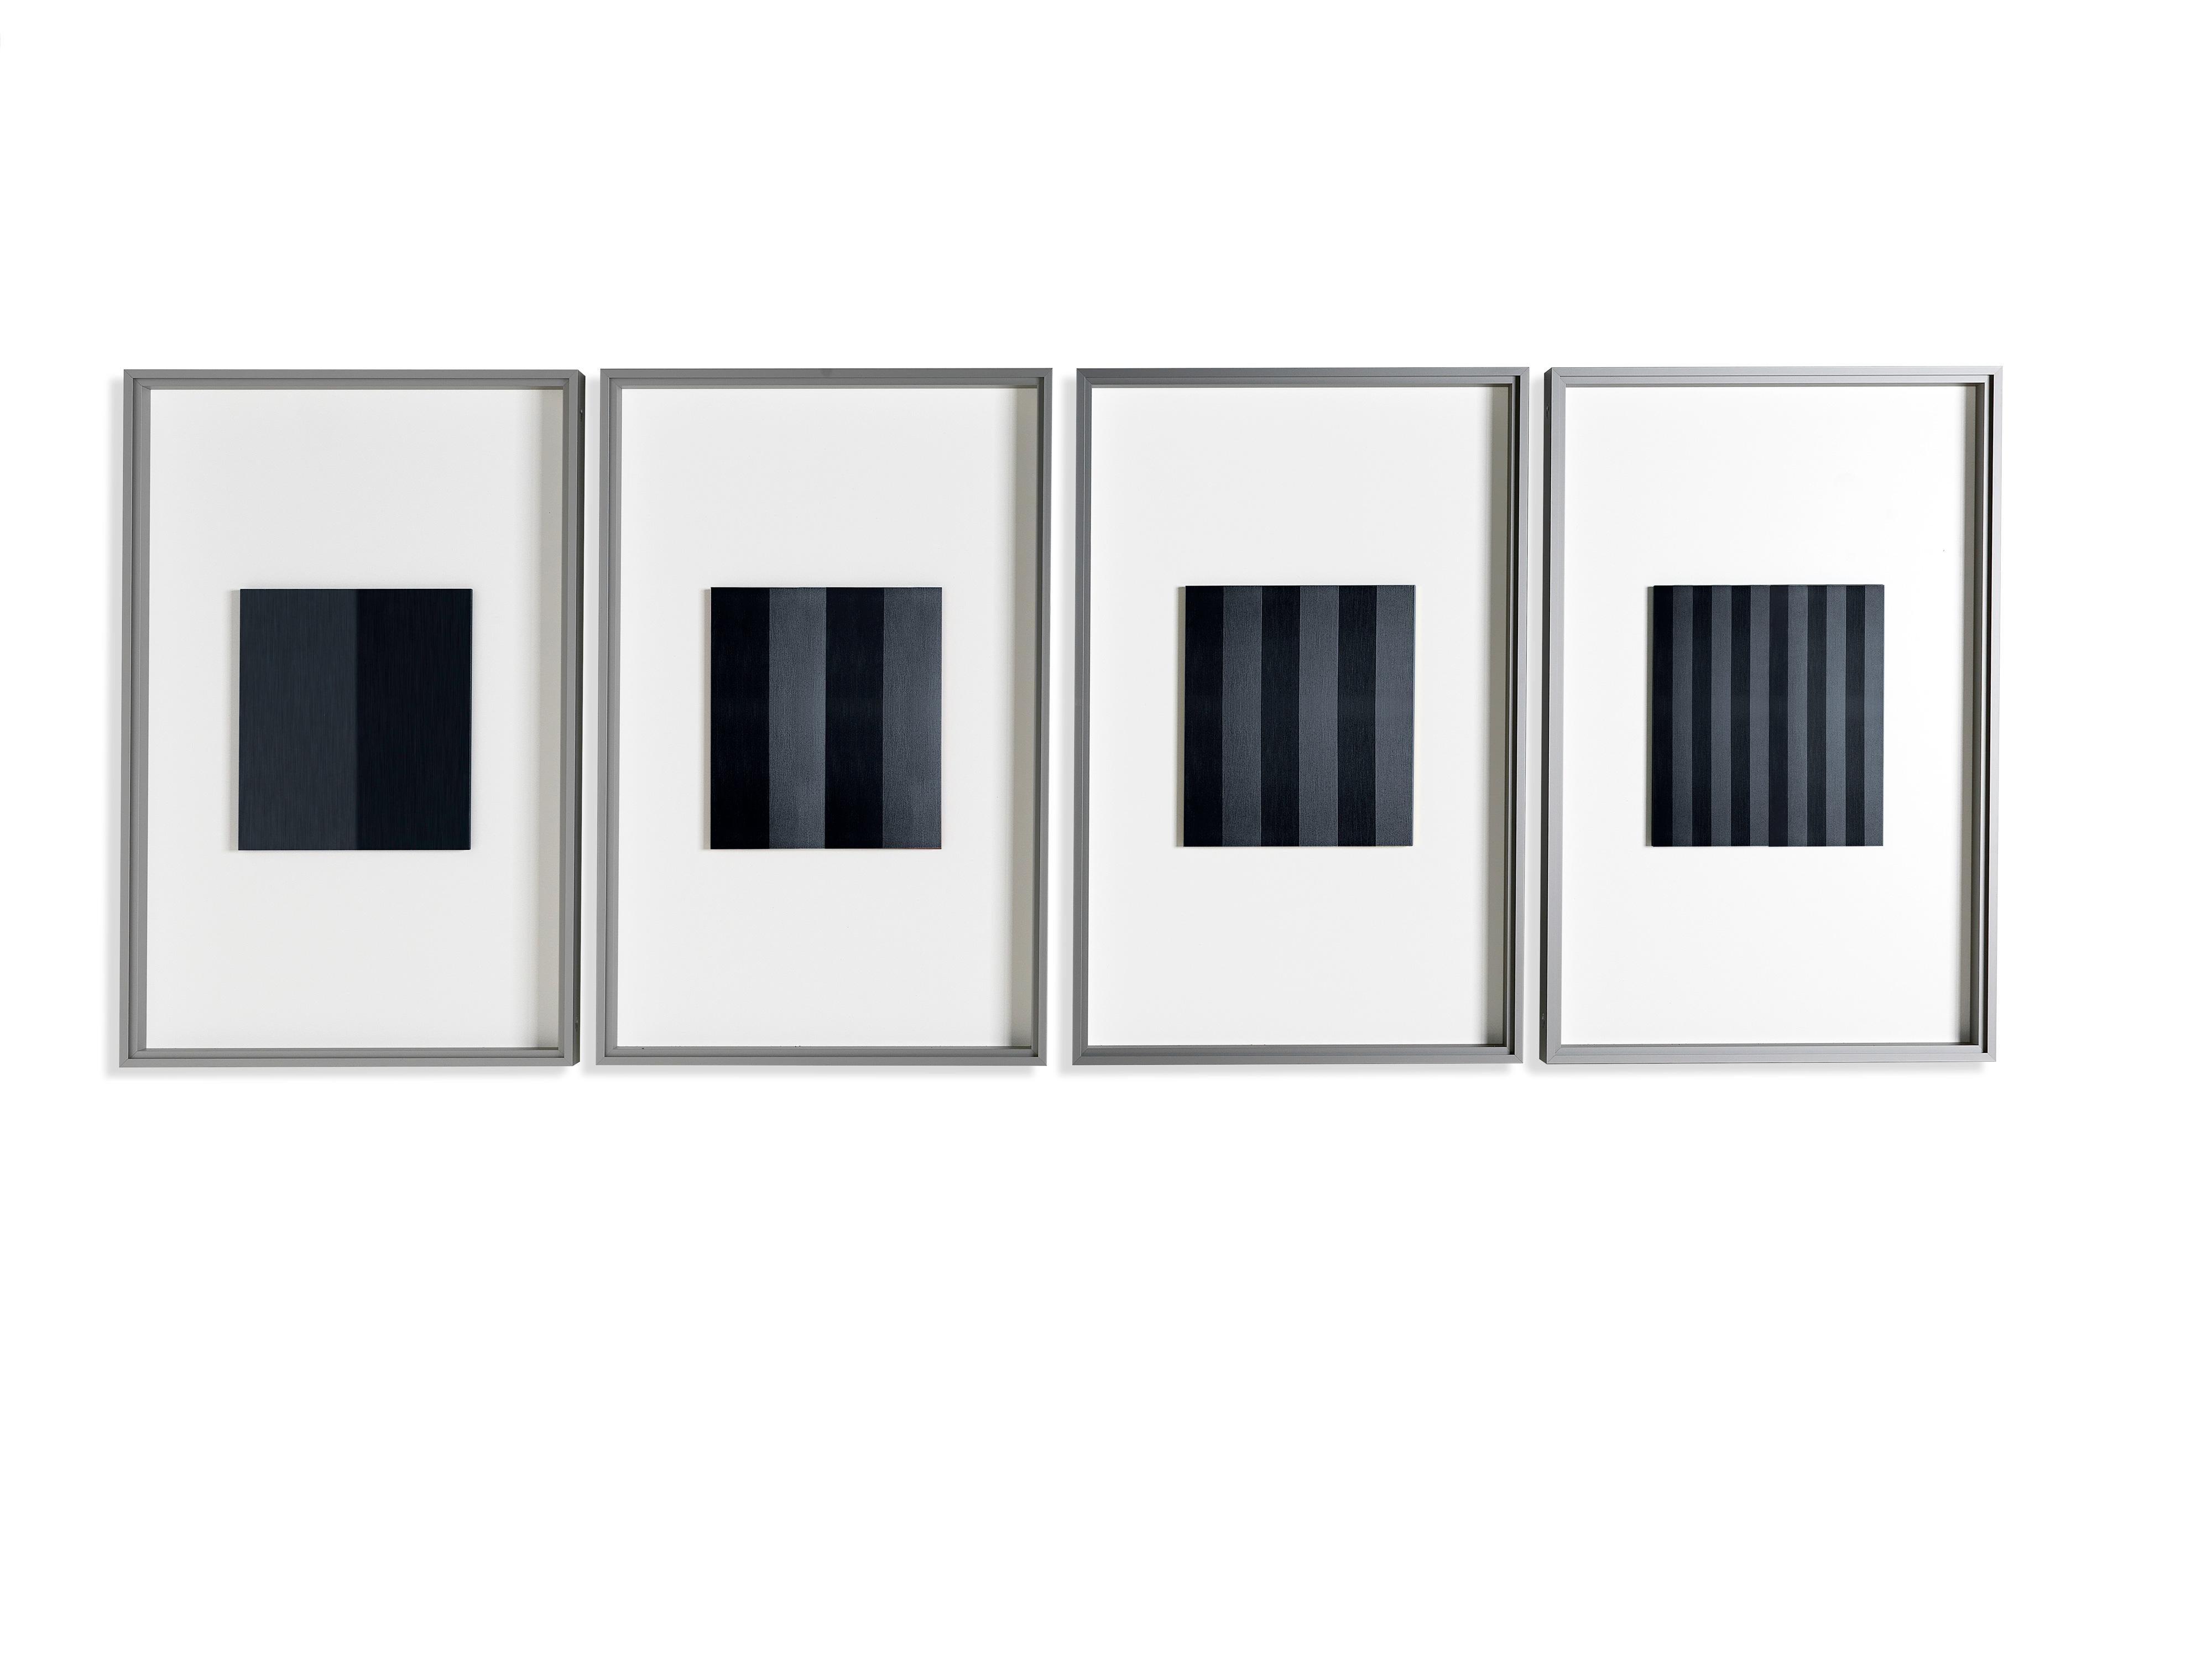 Keiji Takeuchi  Phenomena, Black 2

Limited first edition of 20 pieces in aluminium frame with ultra clear glass.

Blocks of solid anodized aluminum are CNC-milled at different frequencies to create subtly angled panels that reflect light in black